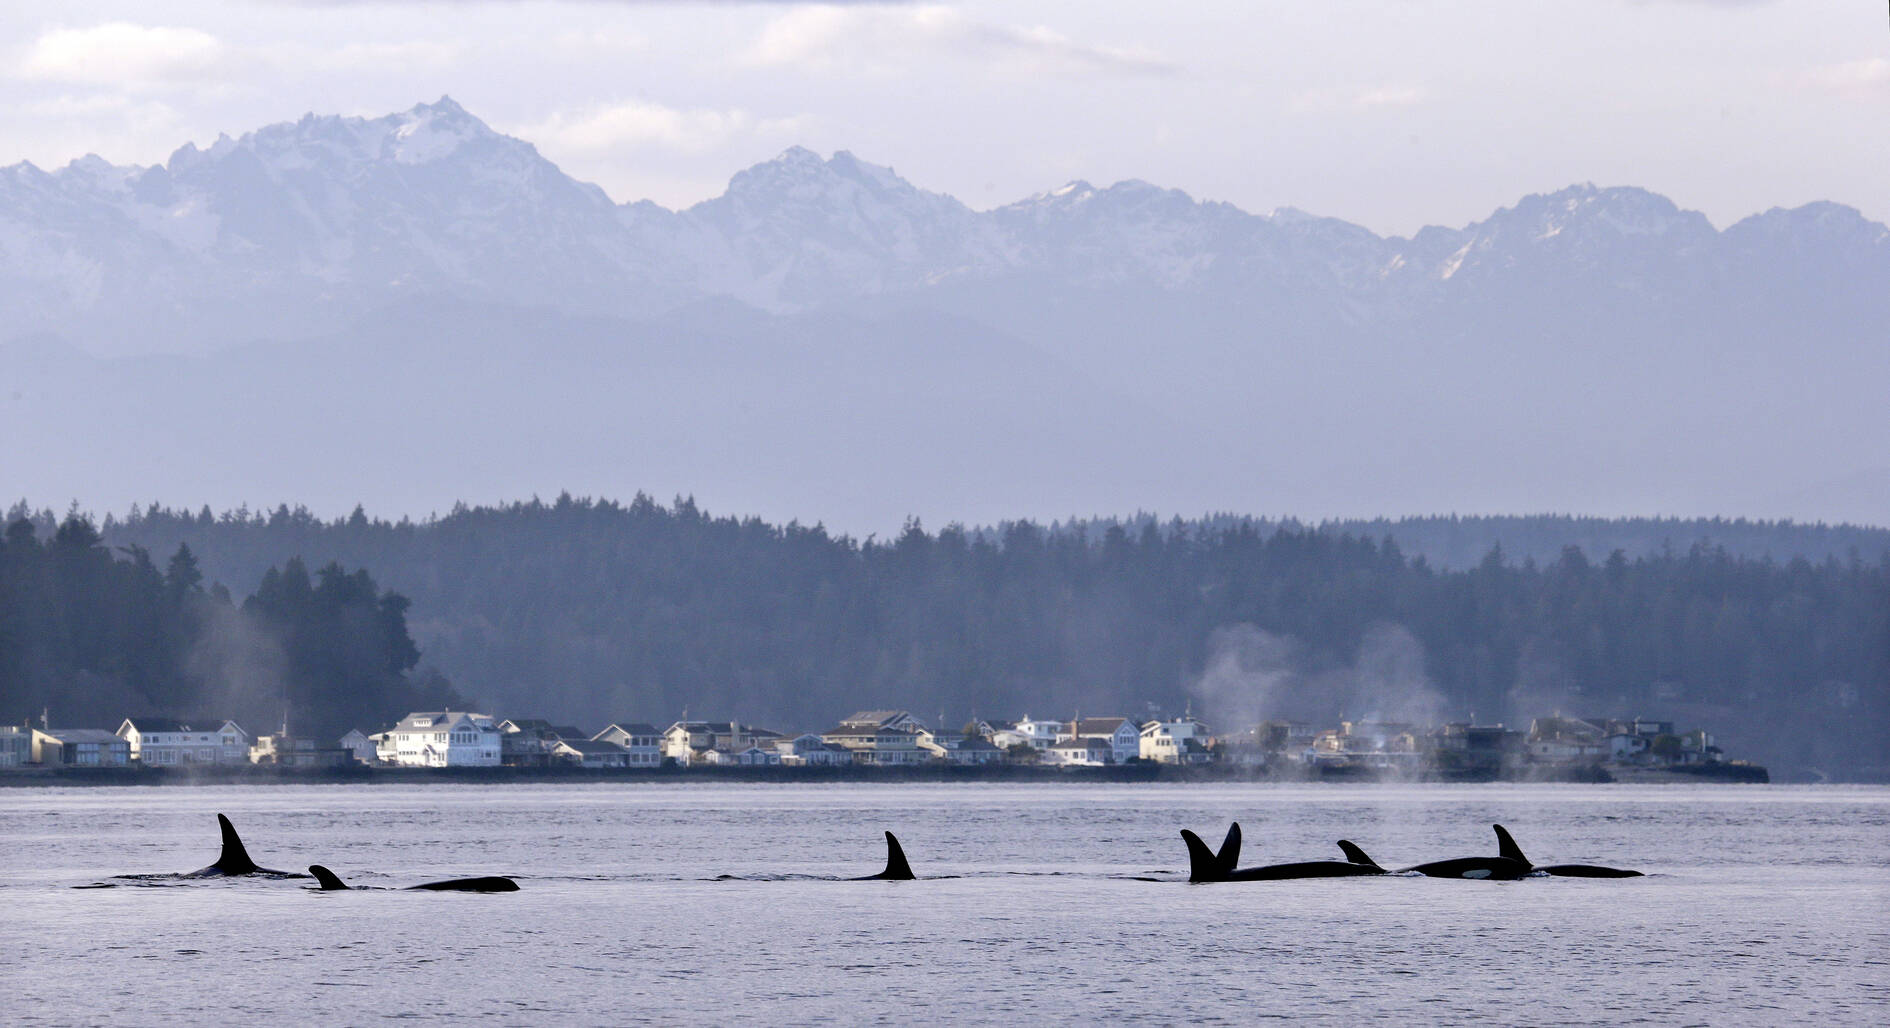 In this Jan. 18, 2014, file photo, endangered orcas swim in Puget Sound and in view of the Olympic Mountains just west of Seattle, as seen from a federal research vessel that has been tracking the whales. A federal court ruling this week has thrown into doubt the future of a valuable commercial king salmon fishery in Southeast Alaska, after a conservation group challenged the government’s approval of the harvest as a threat to protected fish and the endangered killer whales that eat them. (AP Photo / Elaine Thompson)